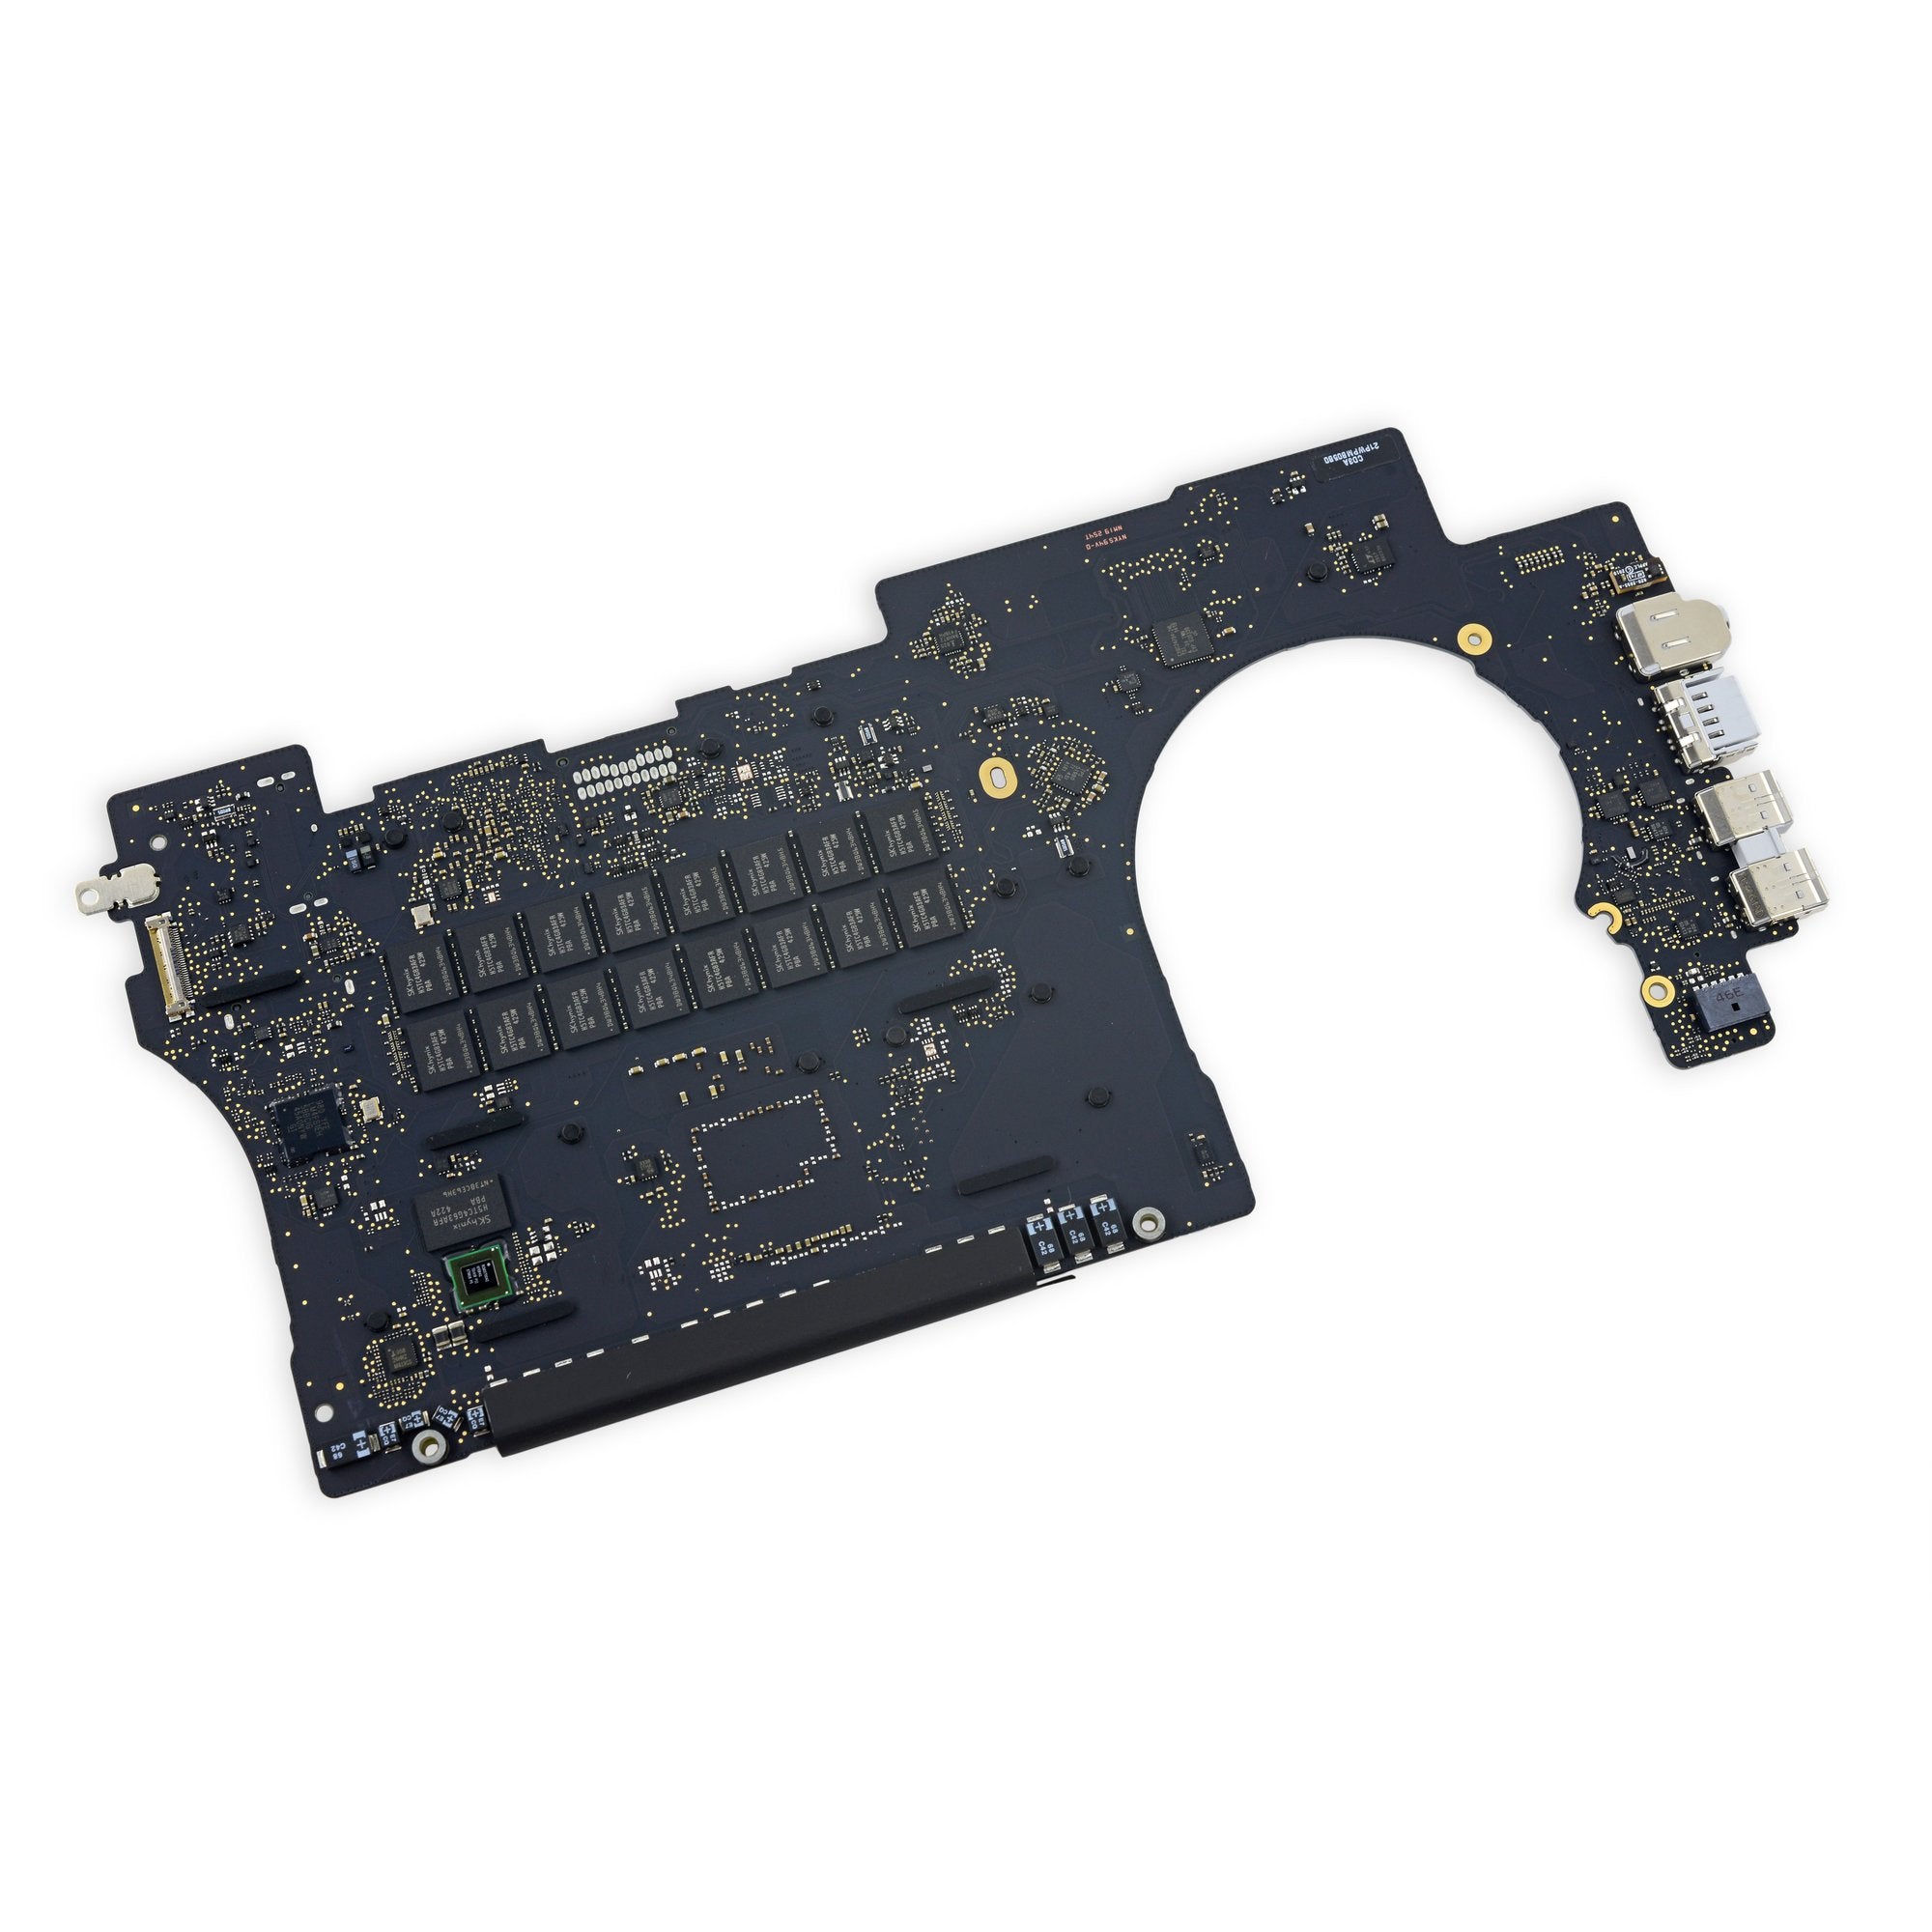 MacBook Pro 15" Retina (Mid 2014, Integrated Graphics) 2.2 GHz Logic Board Used